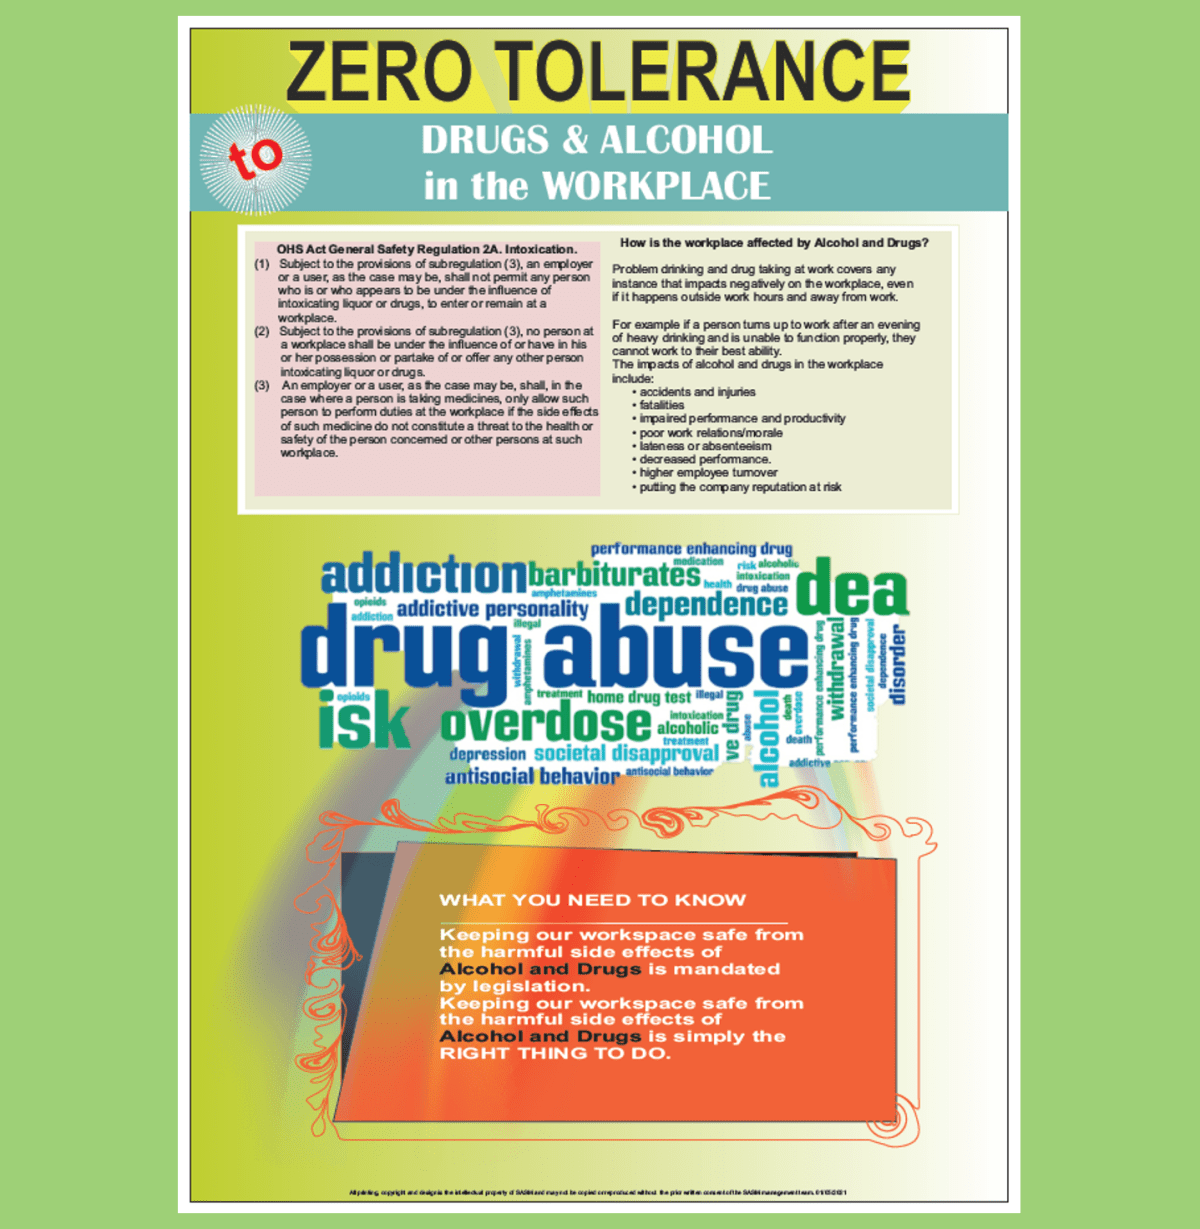 ZERO TOLERANCE - DRUGS & ALCOHOL in the WORKPLACE